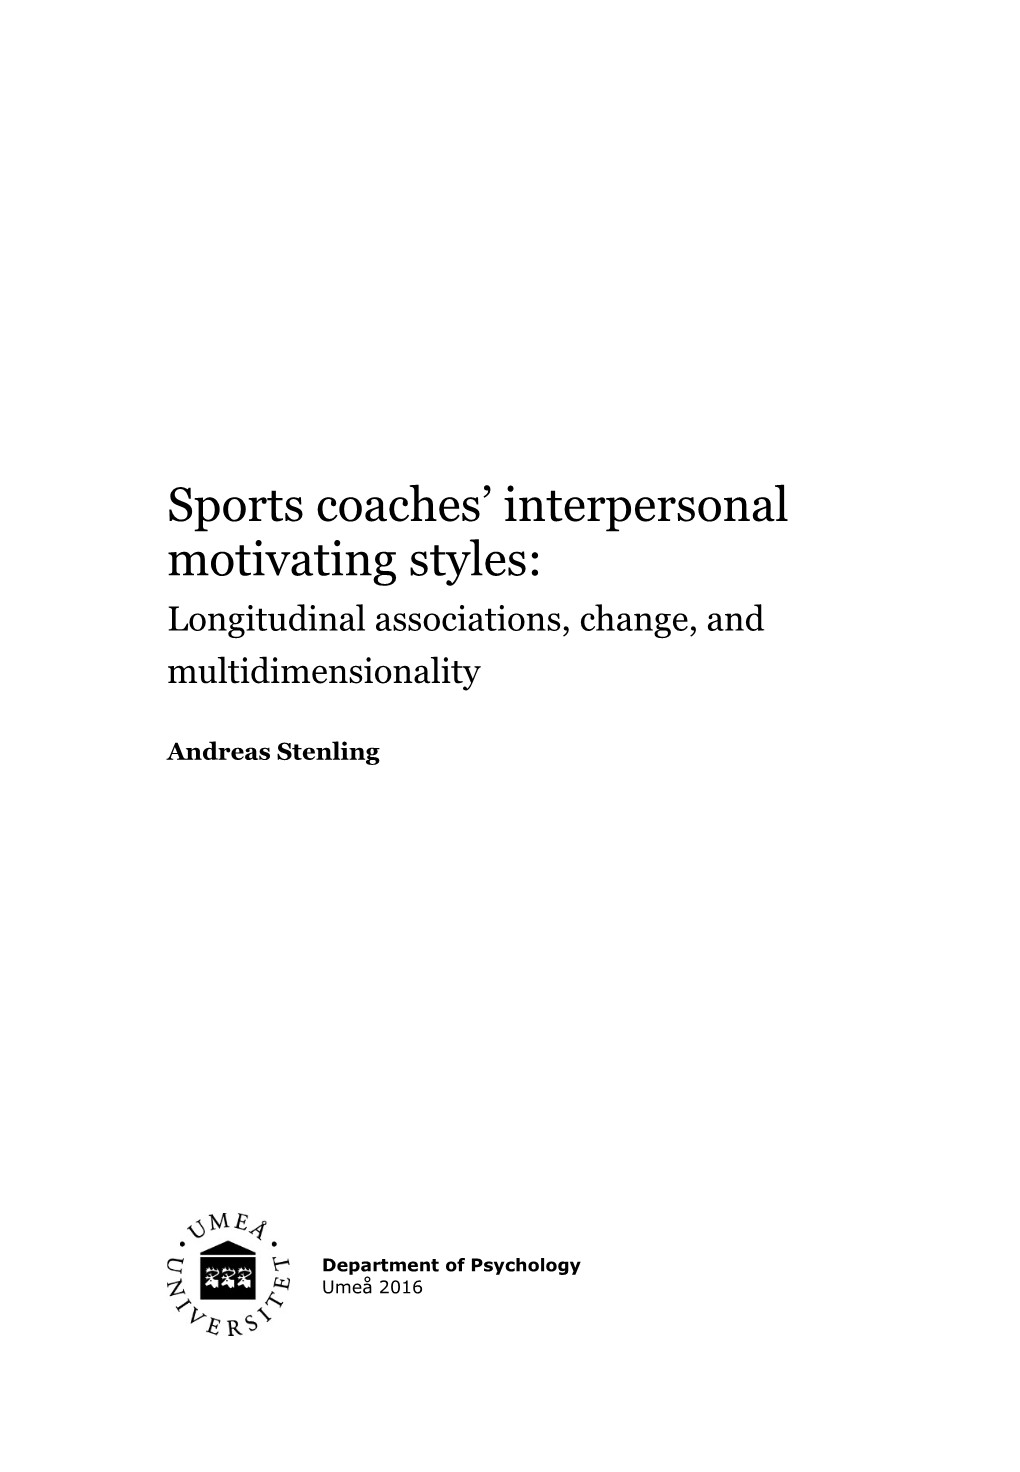 Sports Coaches' Interpersonal Motivating Styles